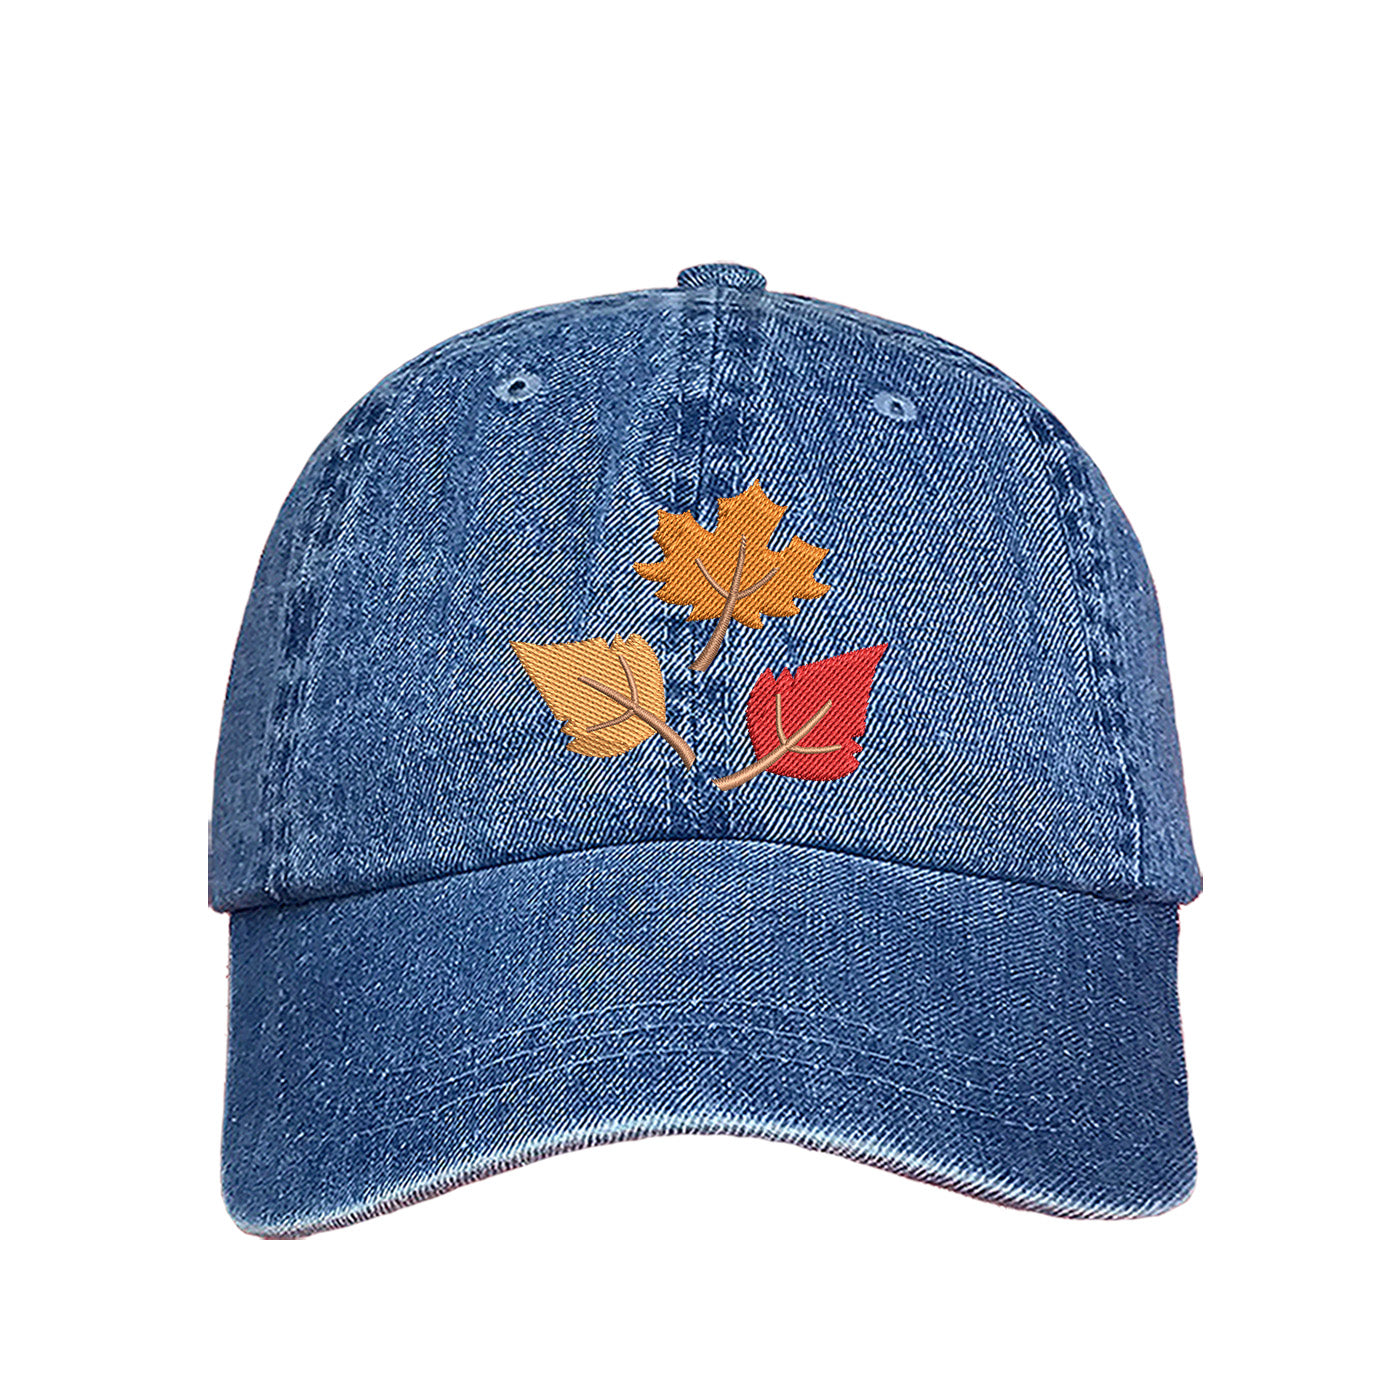 Light Denim baseball cap embroidered with Leaves - DSY Lifestyle